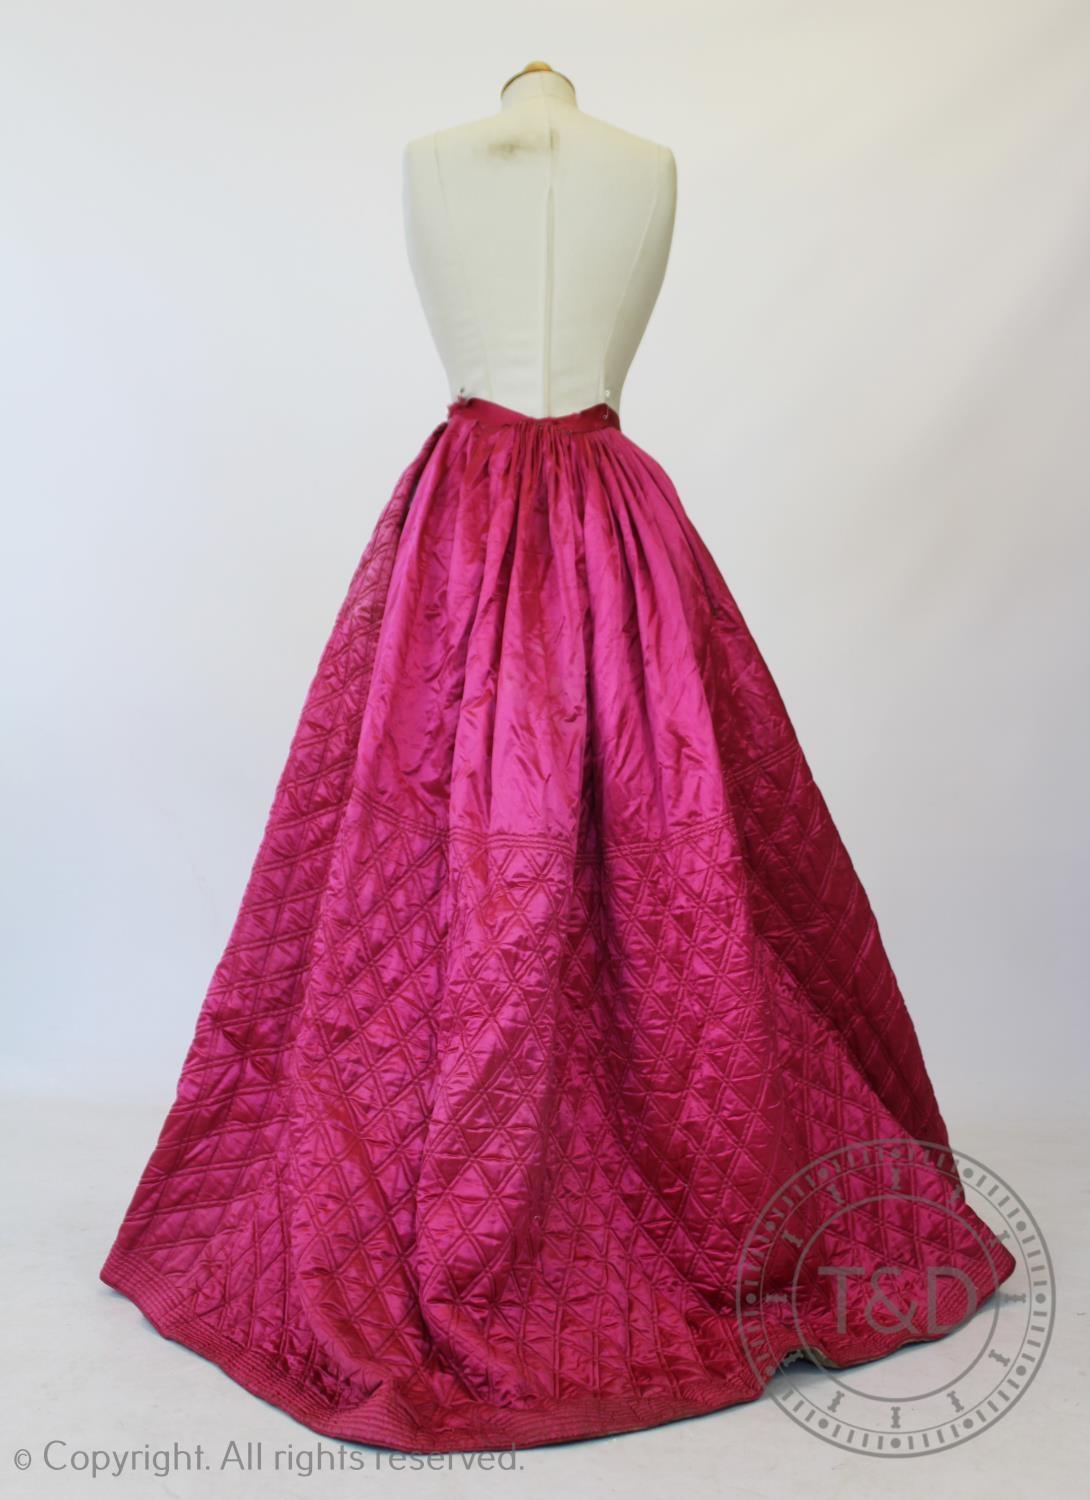 A fuscia silk quilted petticoat, circa 1845, with diamond quilted detail to the front and back and - Image 2 of 4